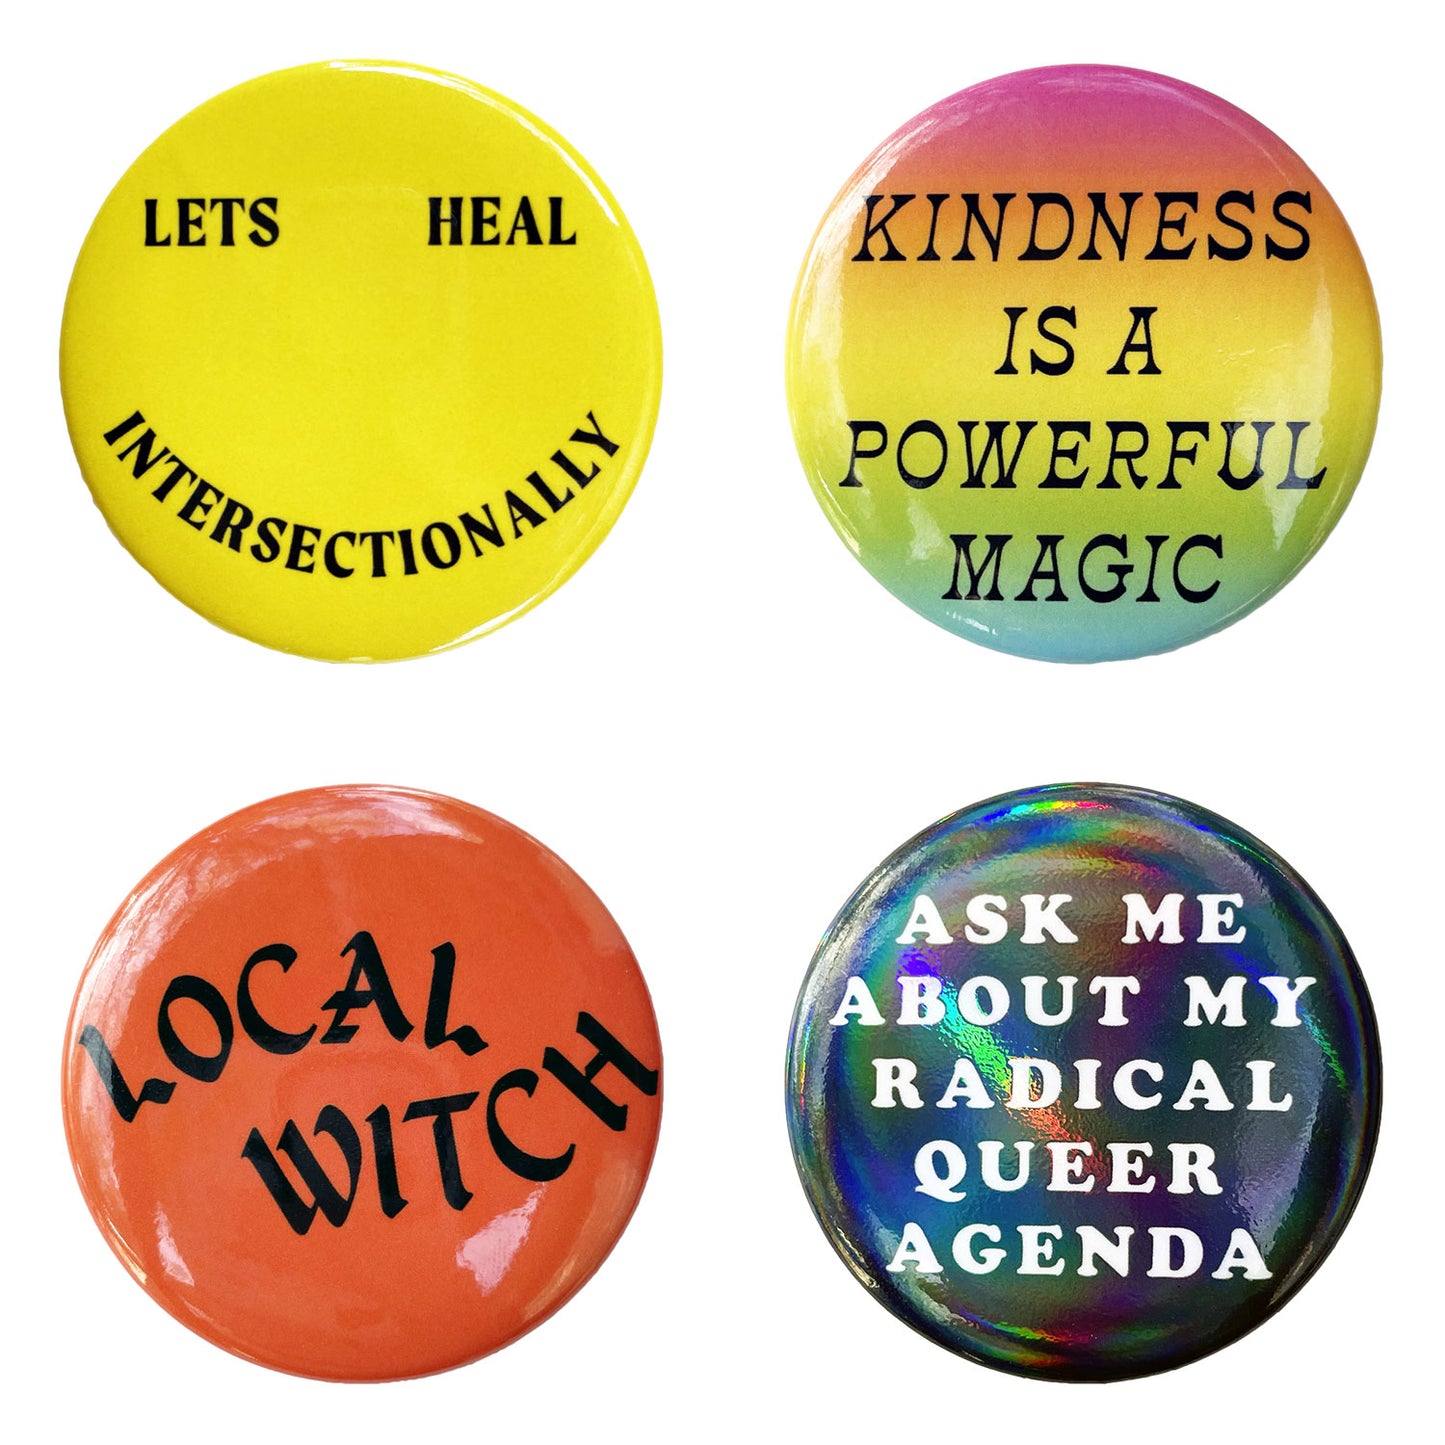 Local Witch | 2.25" Big Button